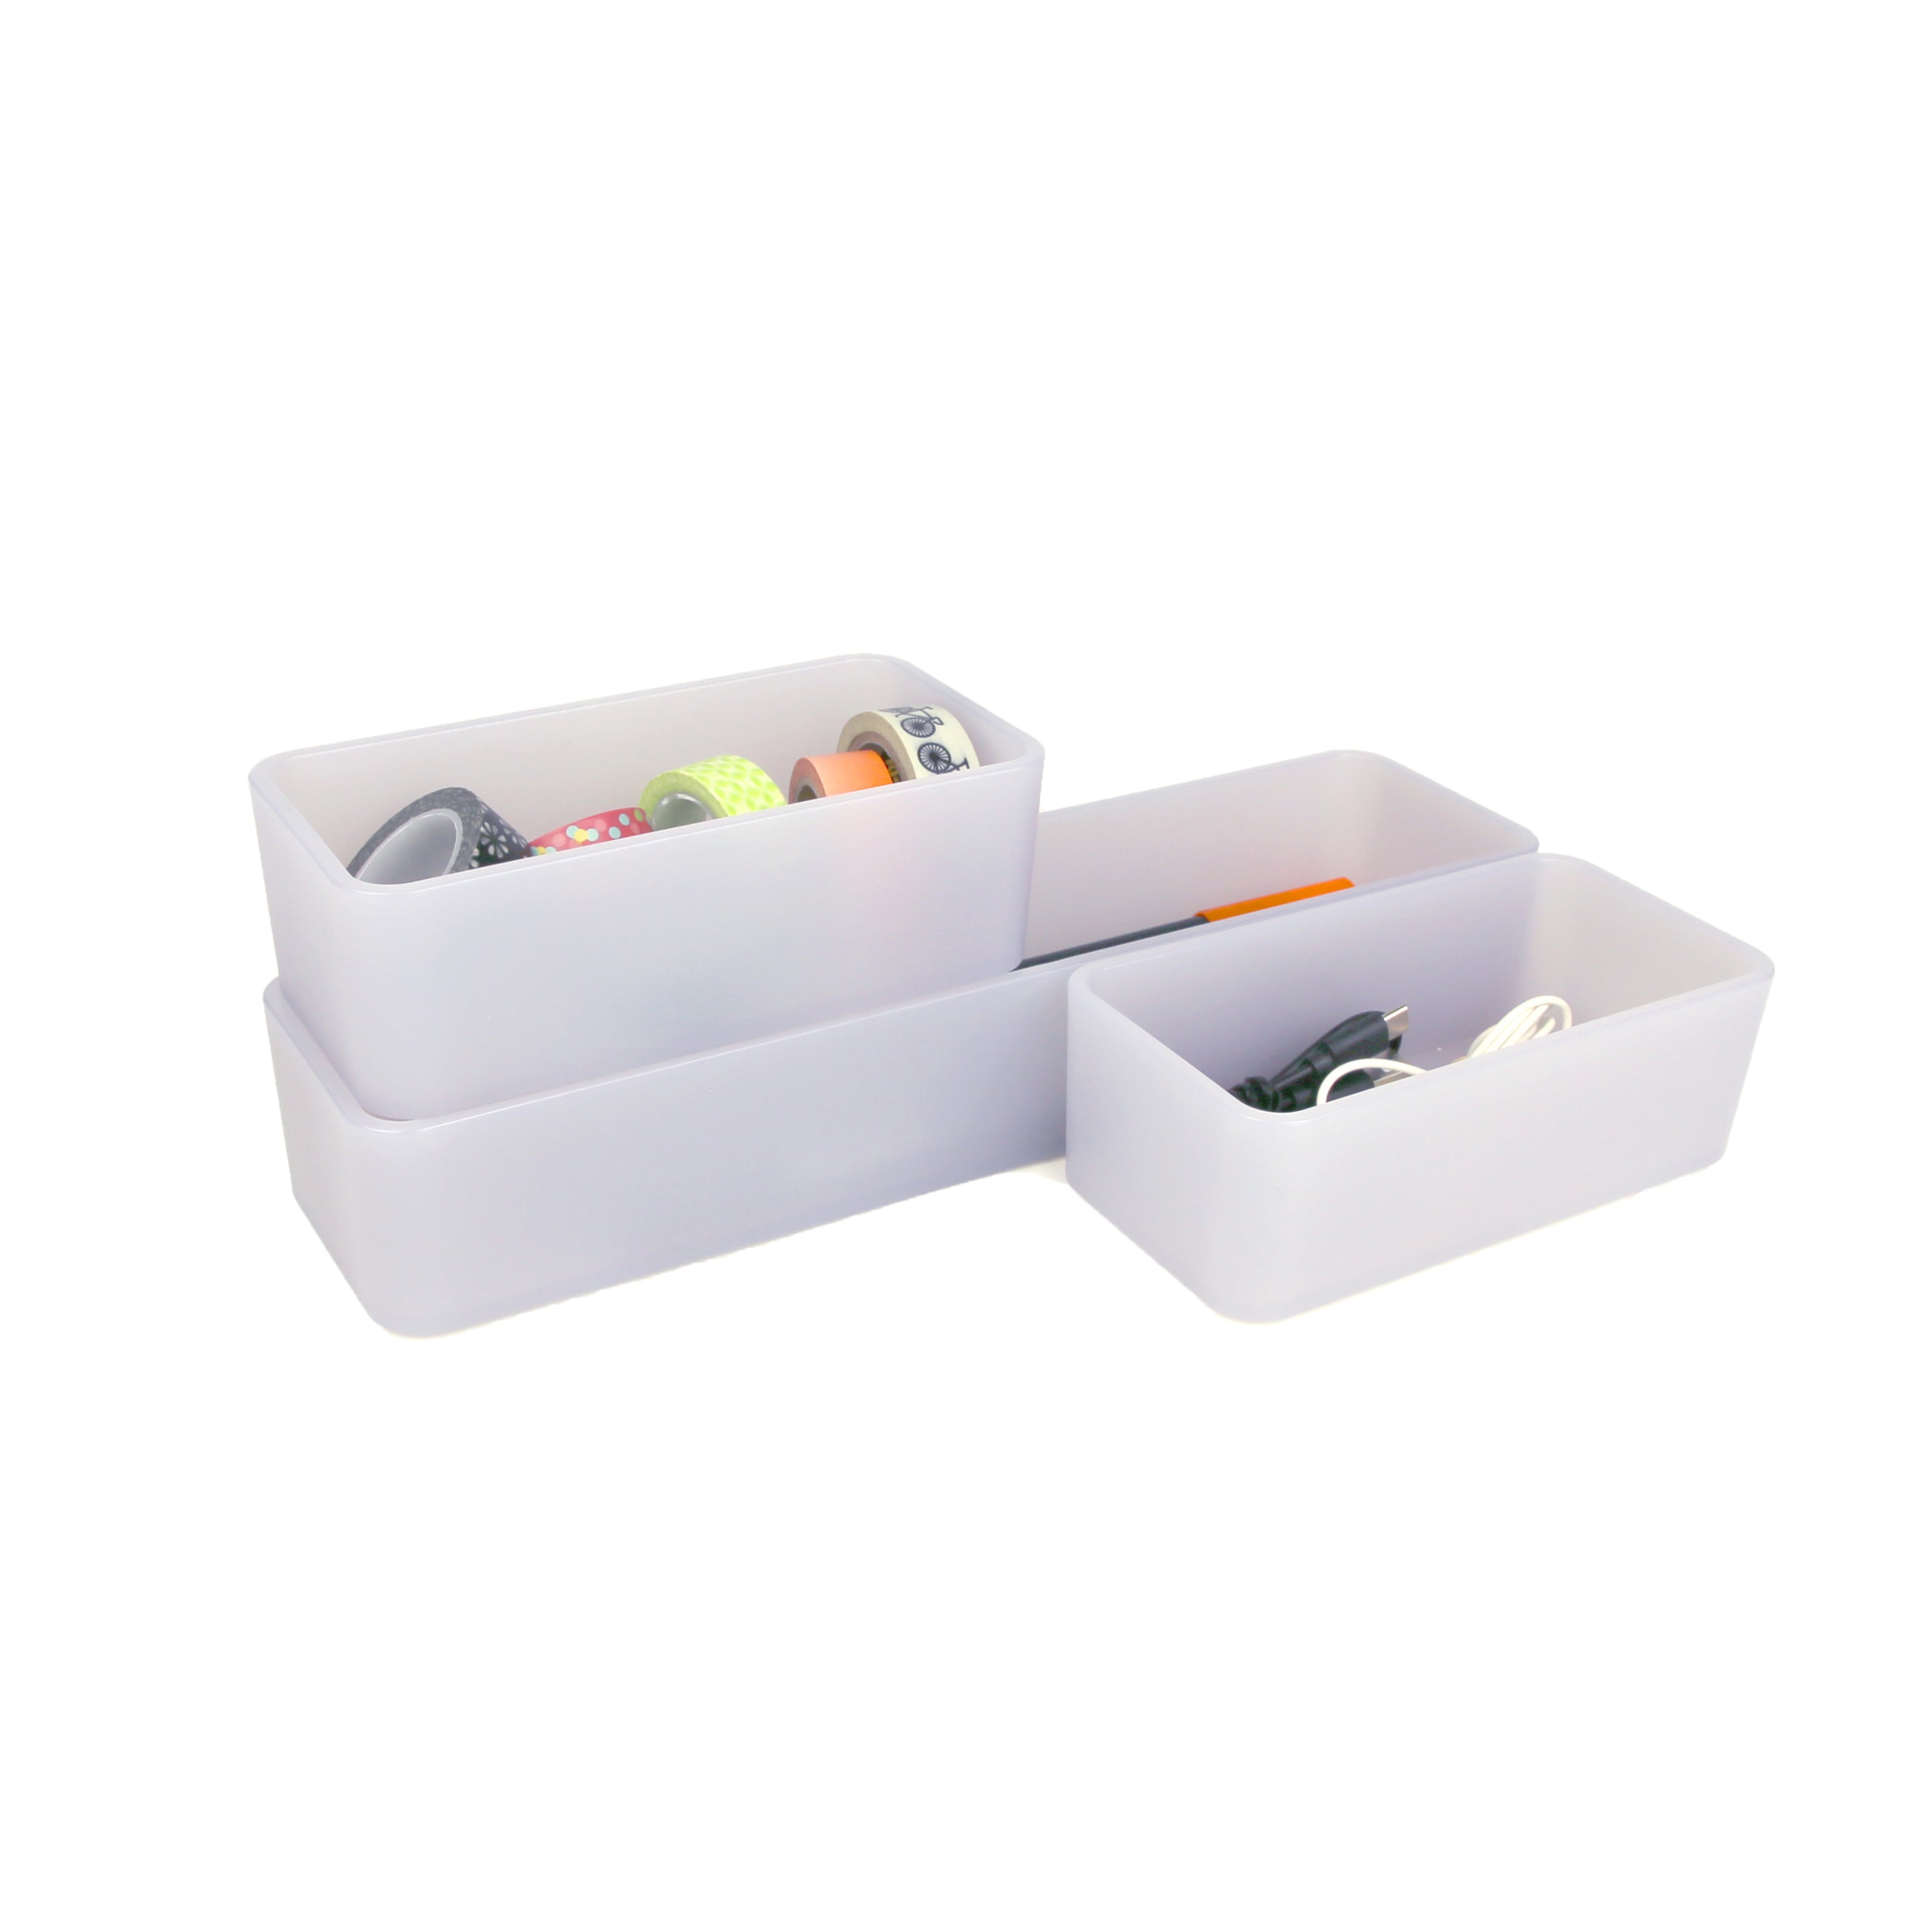 reSTAK recycled stackable organizing bins set of 3 3x12 + 3x6